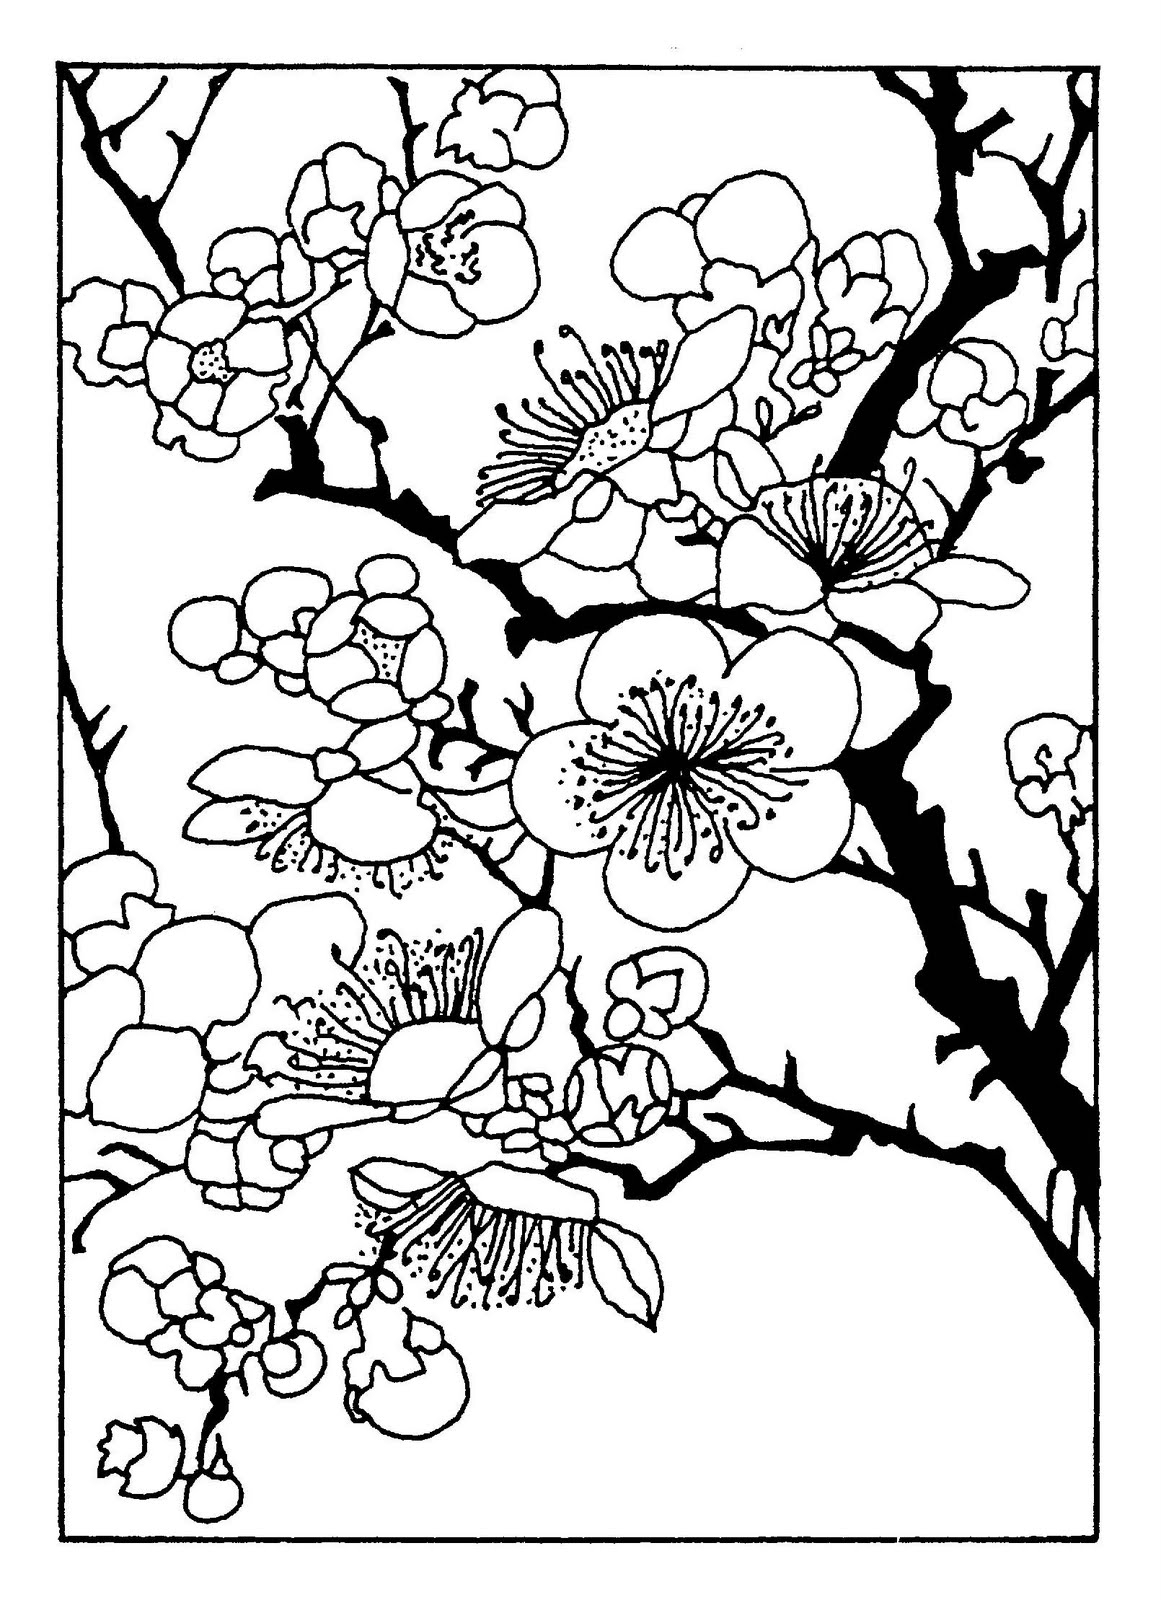 Cherry Blossom Coloring Page at Free printable